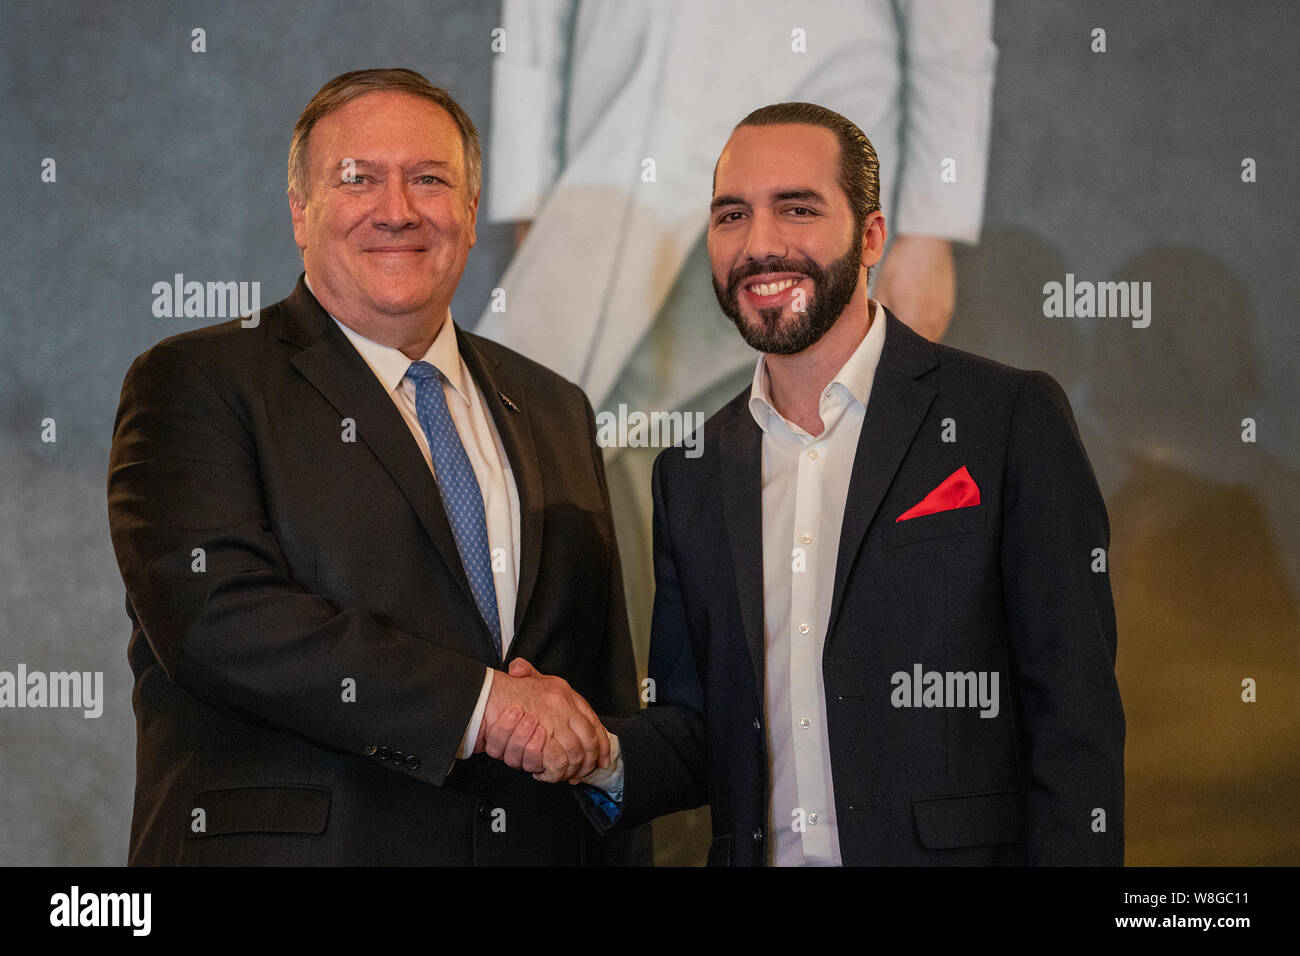 U.S. Secretary of State Michael R. Pompeo shakes hands with Salvadoran President Nayib Bukele during a joint press availability, in San Salvador, El S Stock Photo